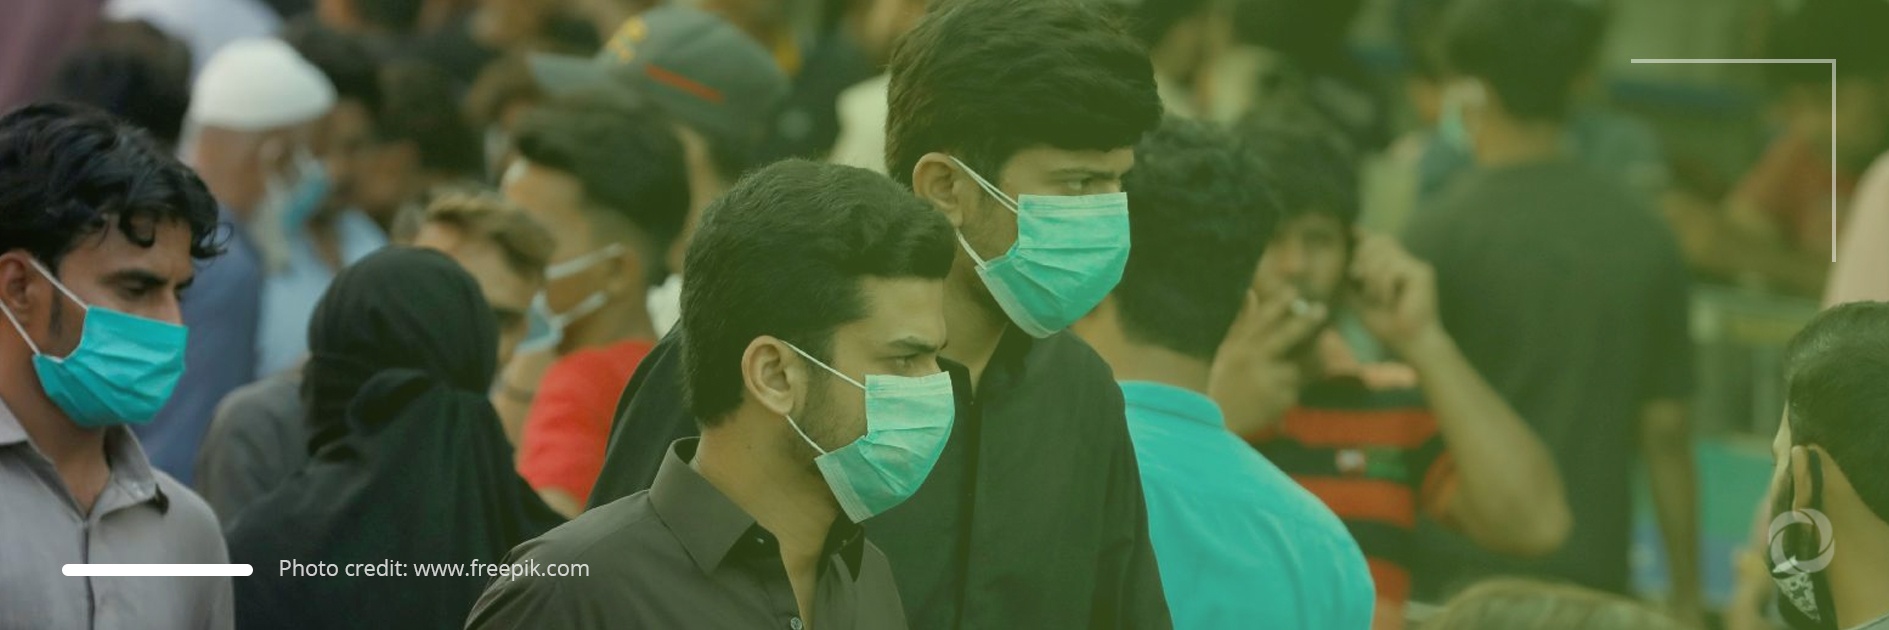 Pandemic-hit South Asia expected to record 6.8% economic growth